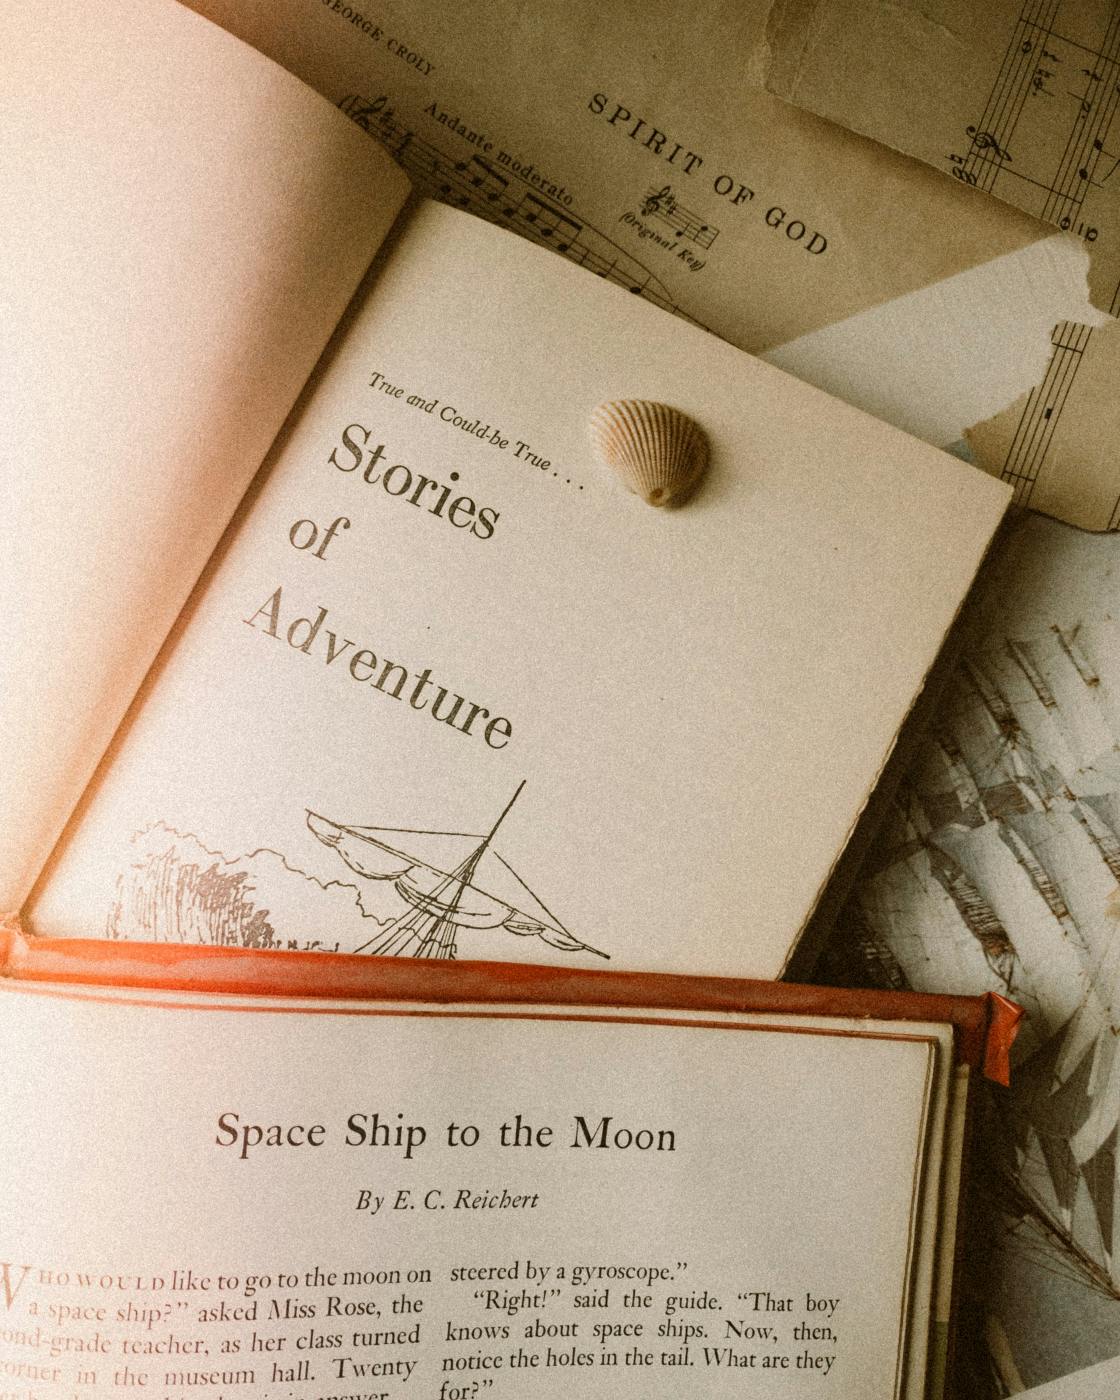 Open books, Stories of Adventure, Space Ship to the Moon and a sea shell